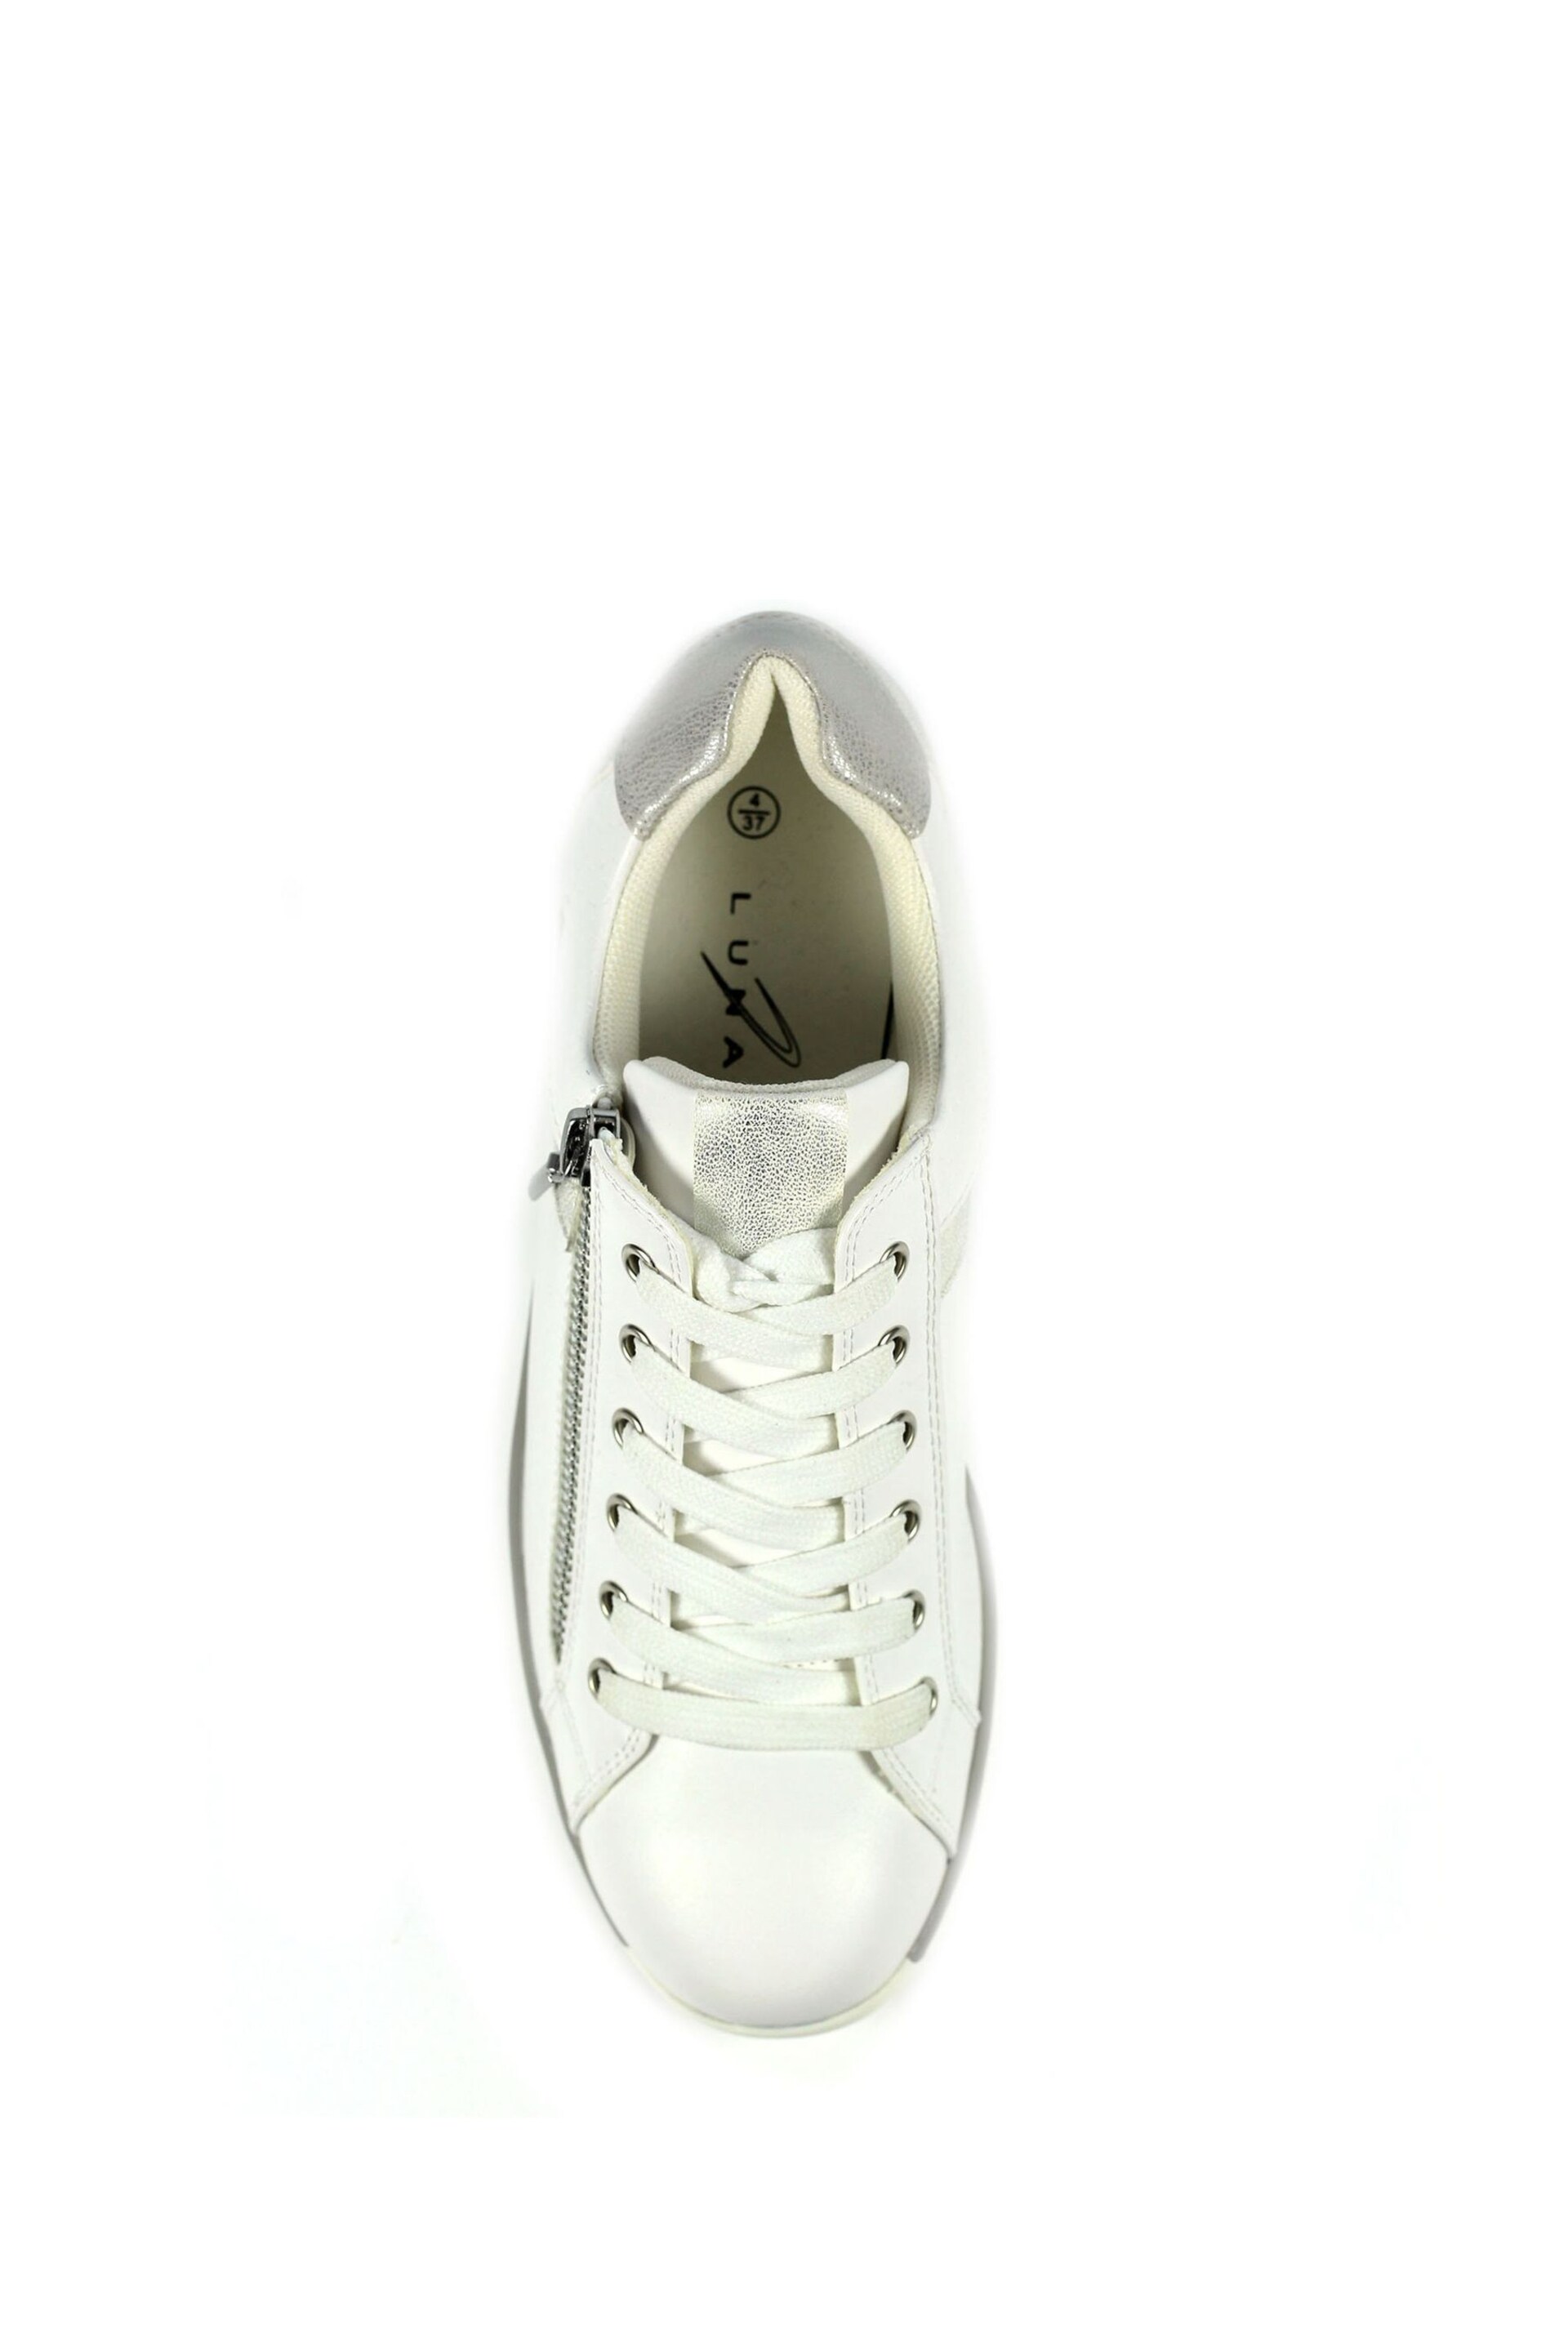 Lunar Lester White Trainers - Image 6 of 7